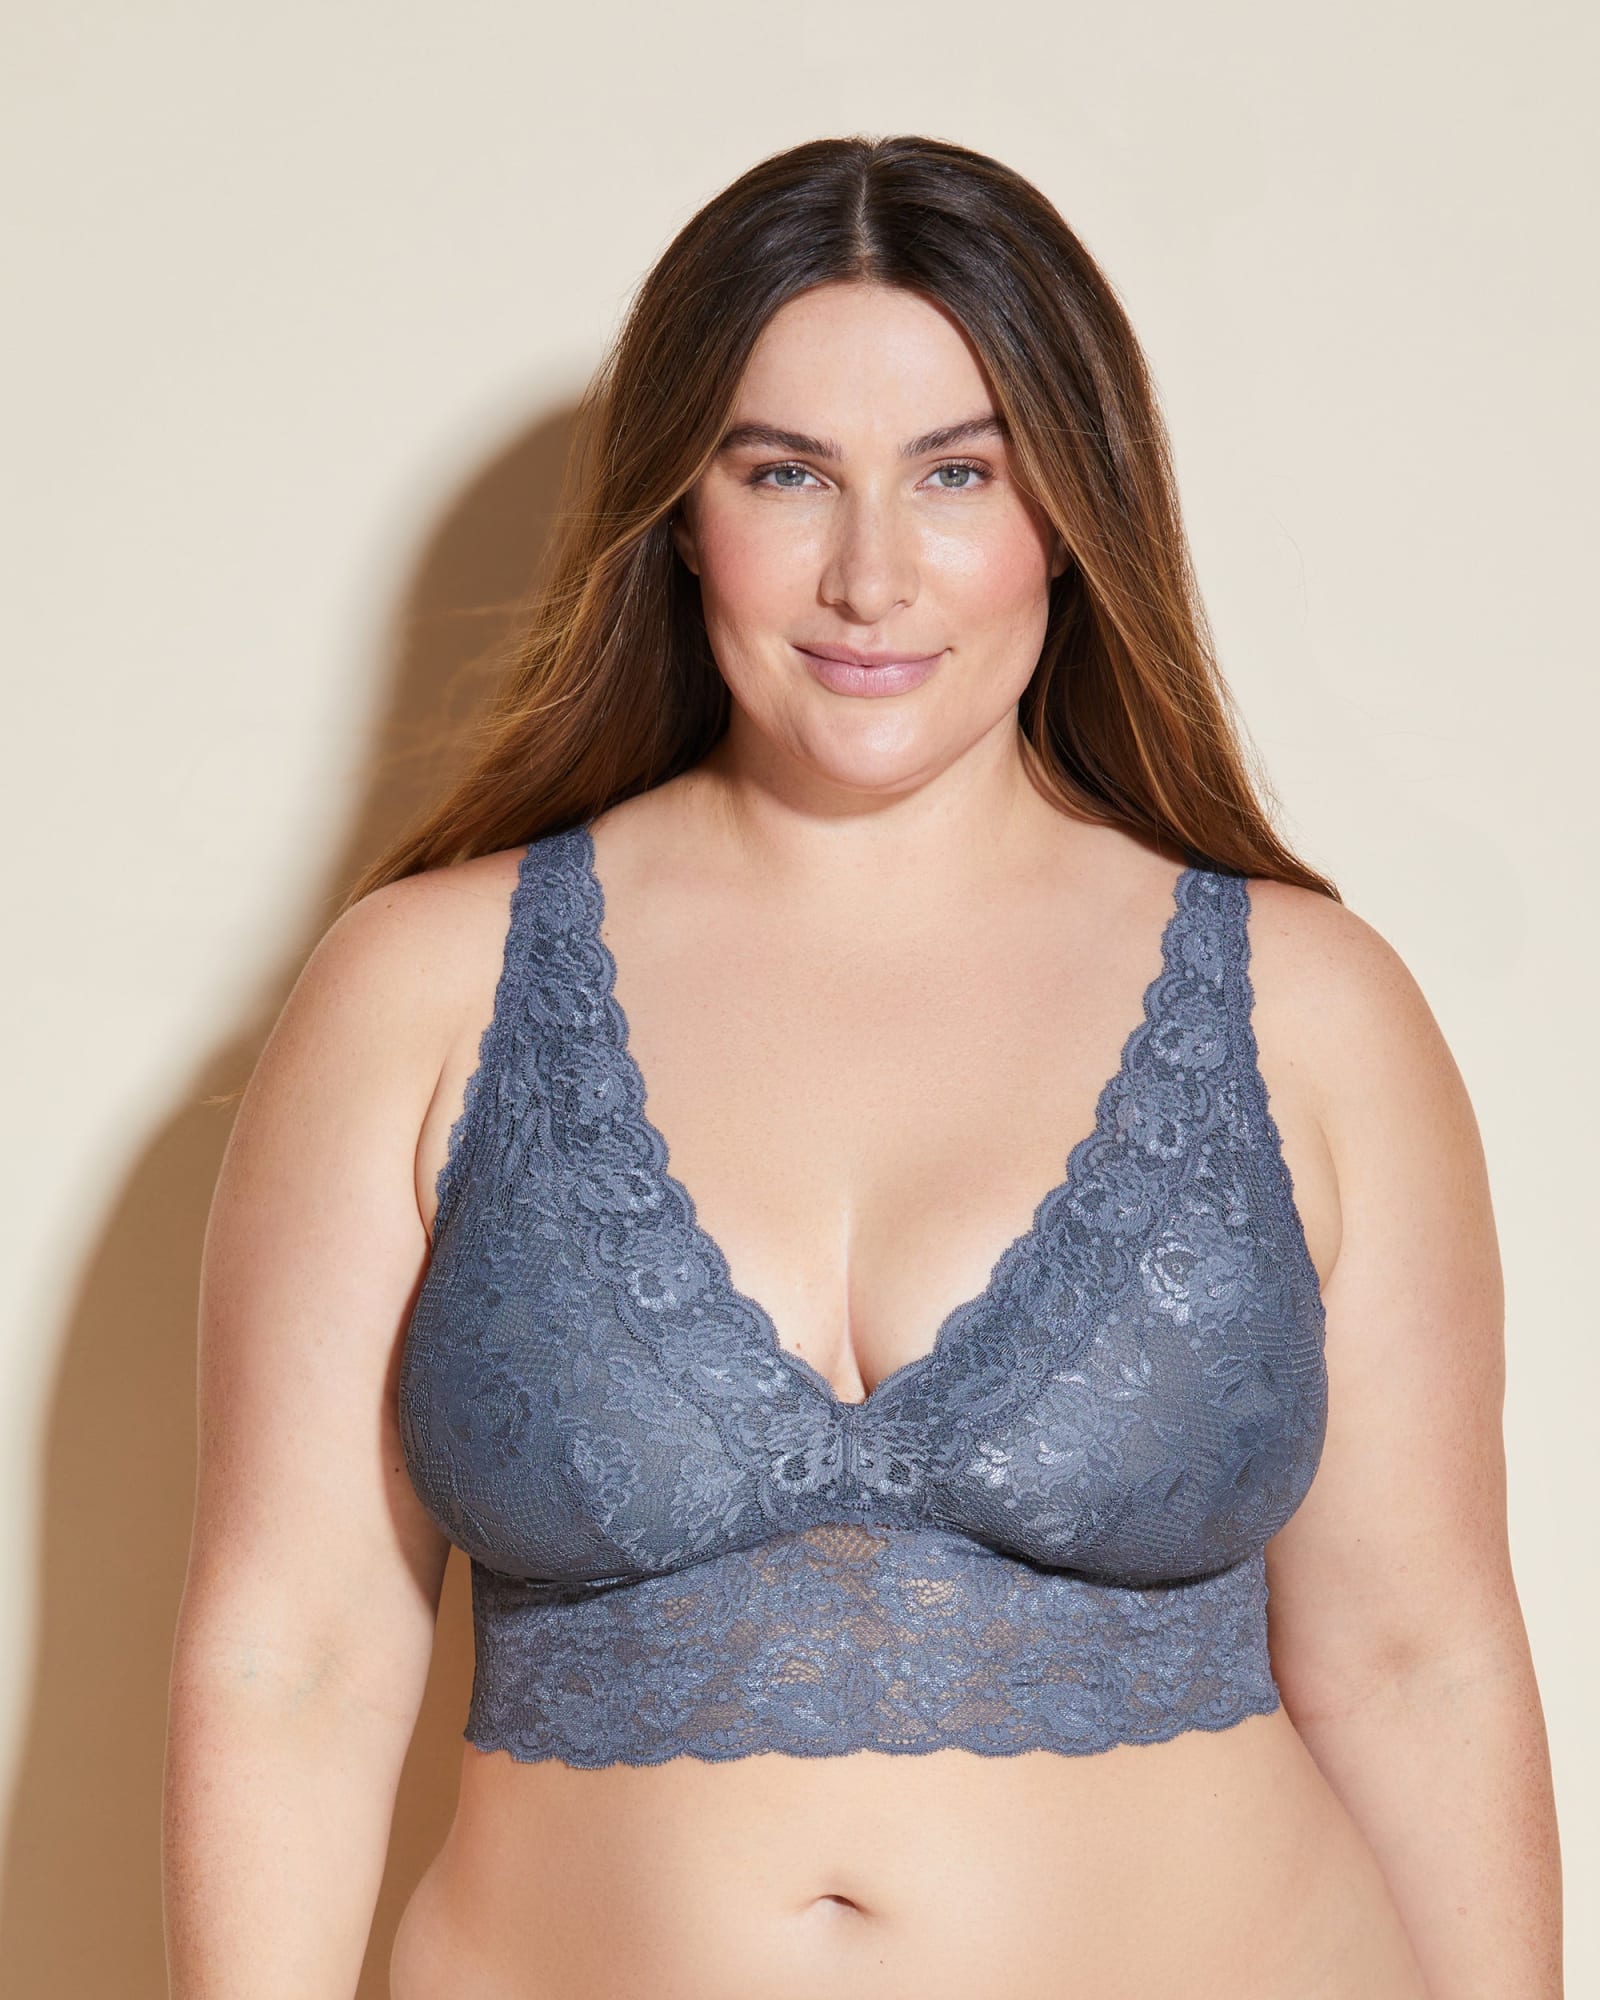 Comfortable Bras For Big Busts